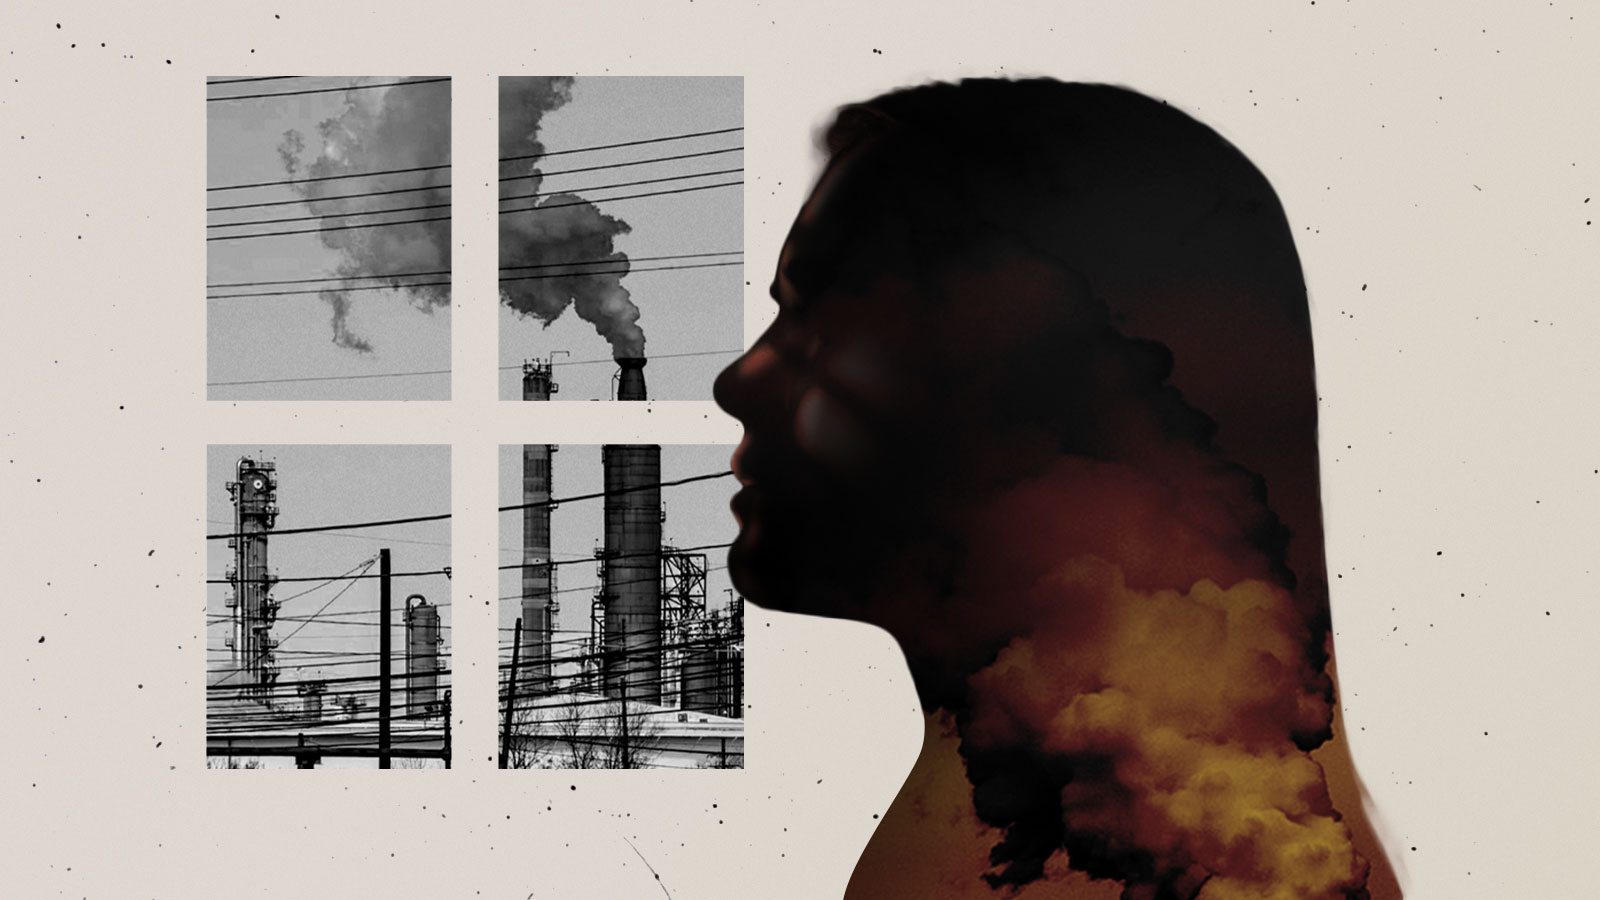 Collage: on the left, four rectangles arranged like window panes filled with a black and white photo of oil refinery towers spewing smoke; on the right a silhouette of a woman in profile facing left, filled with a photo of dark orange and red smoke